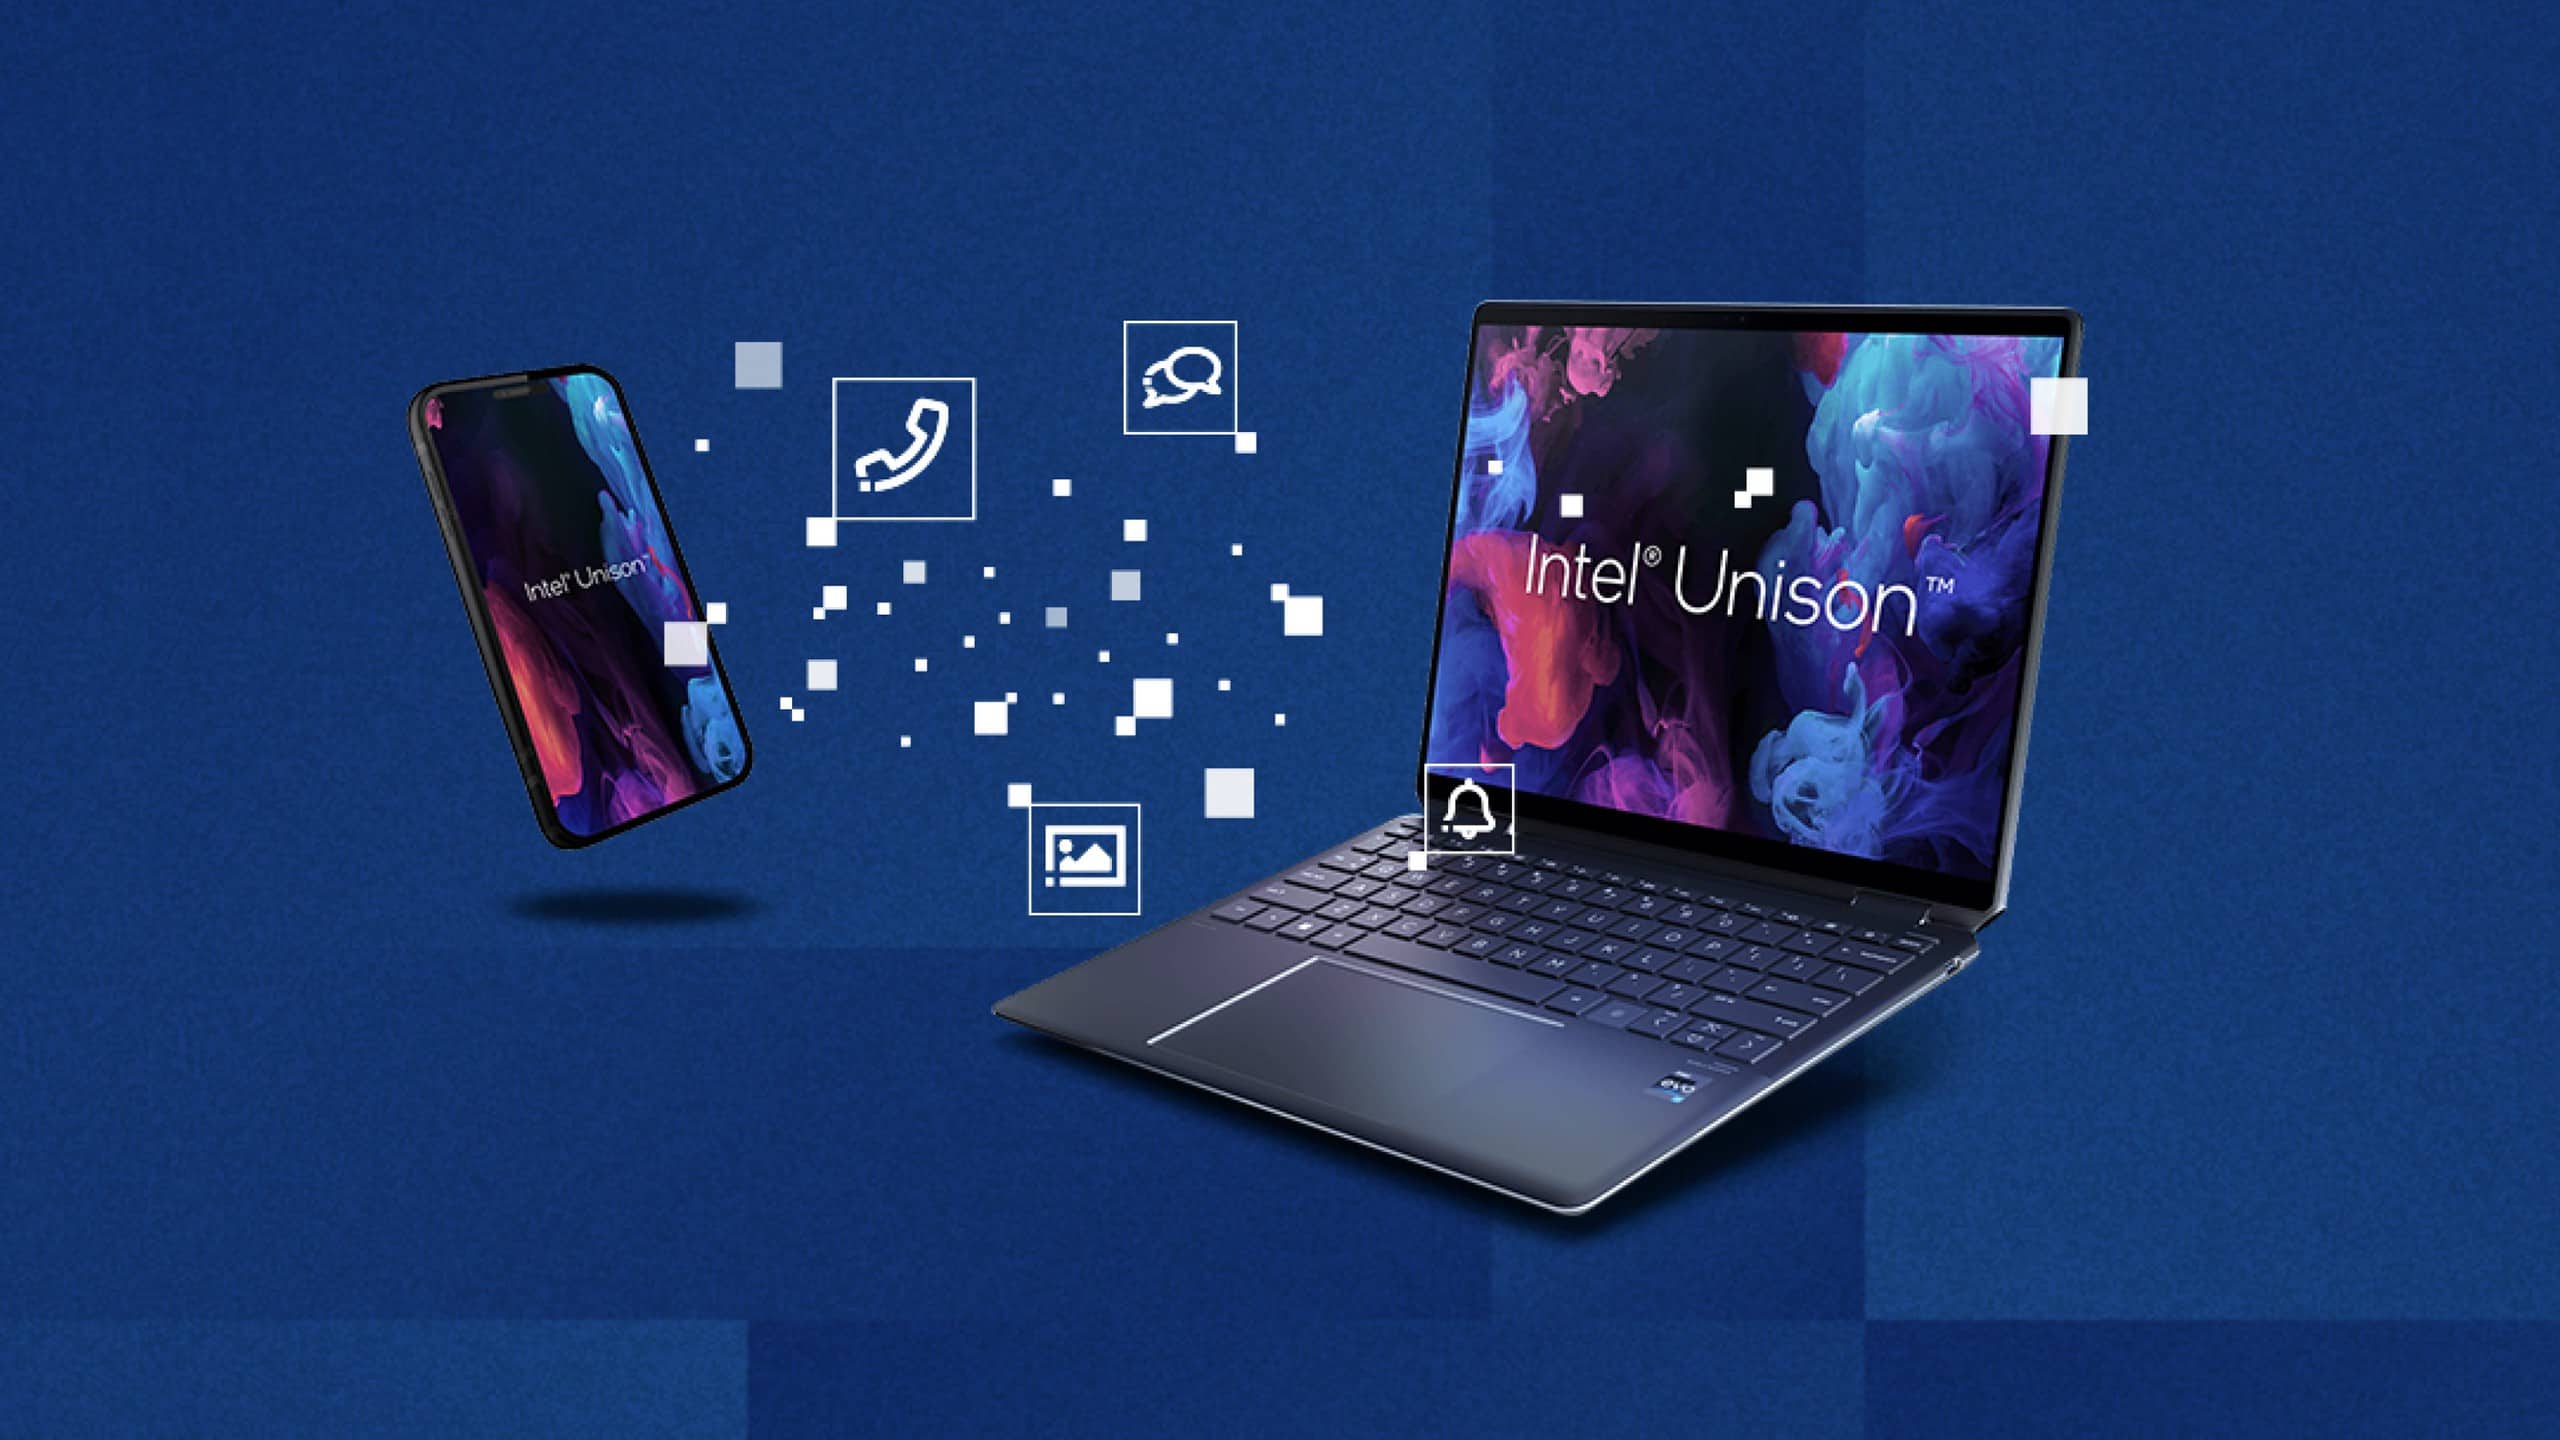 Intel Unison can deliver seamless connectivity between your PCs and iOS devices